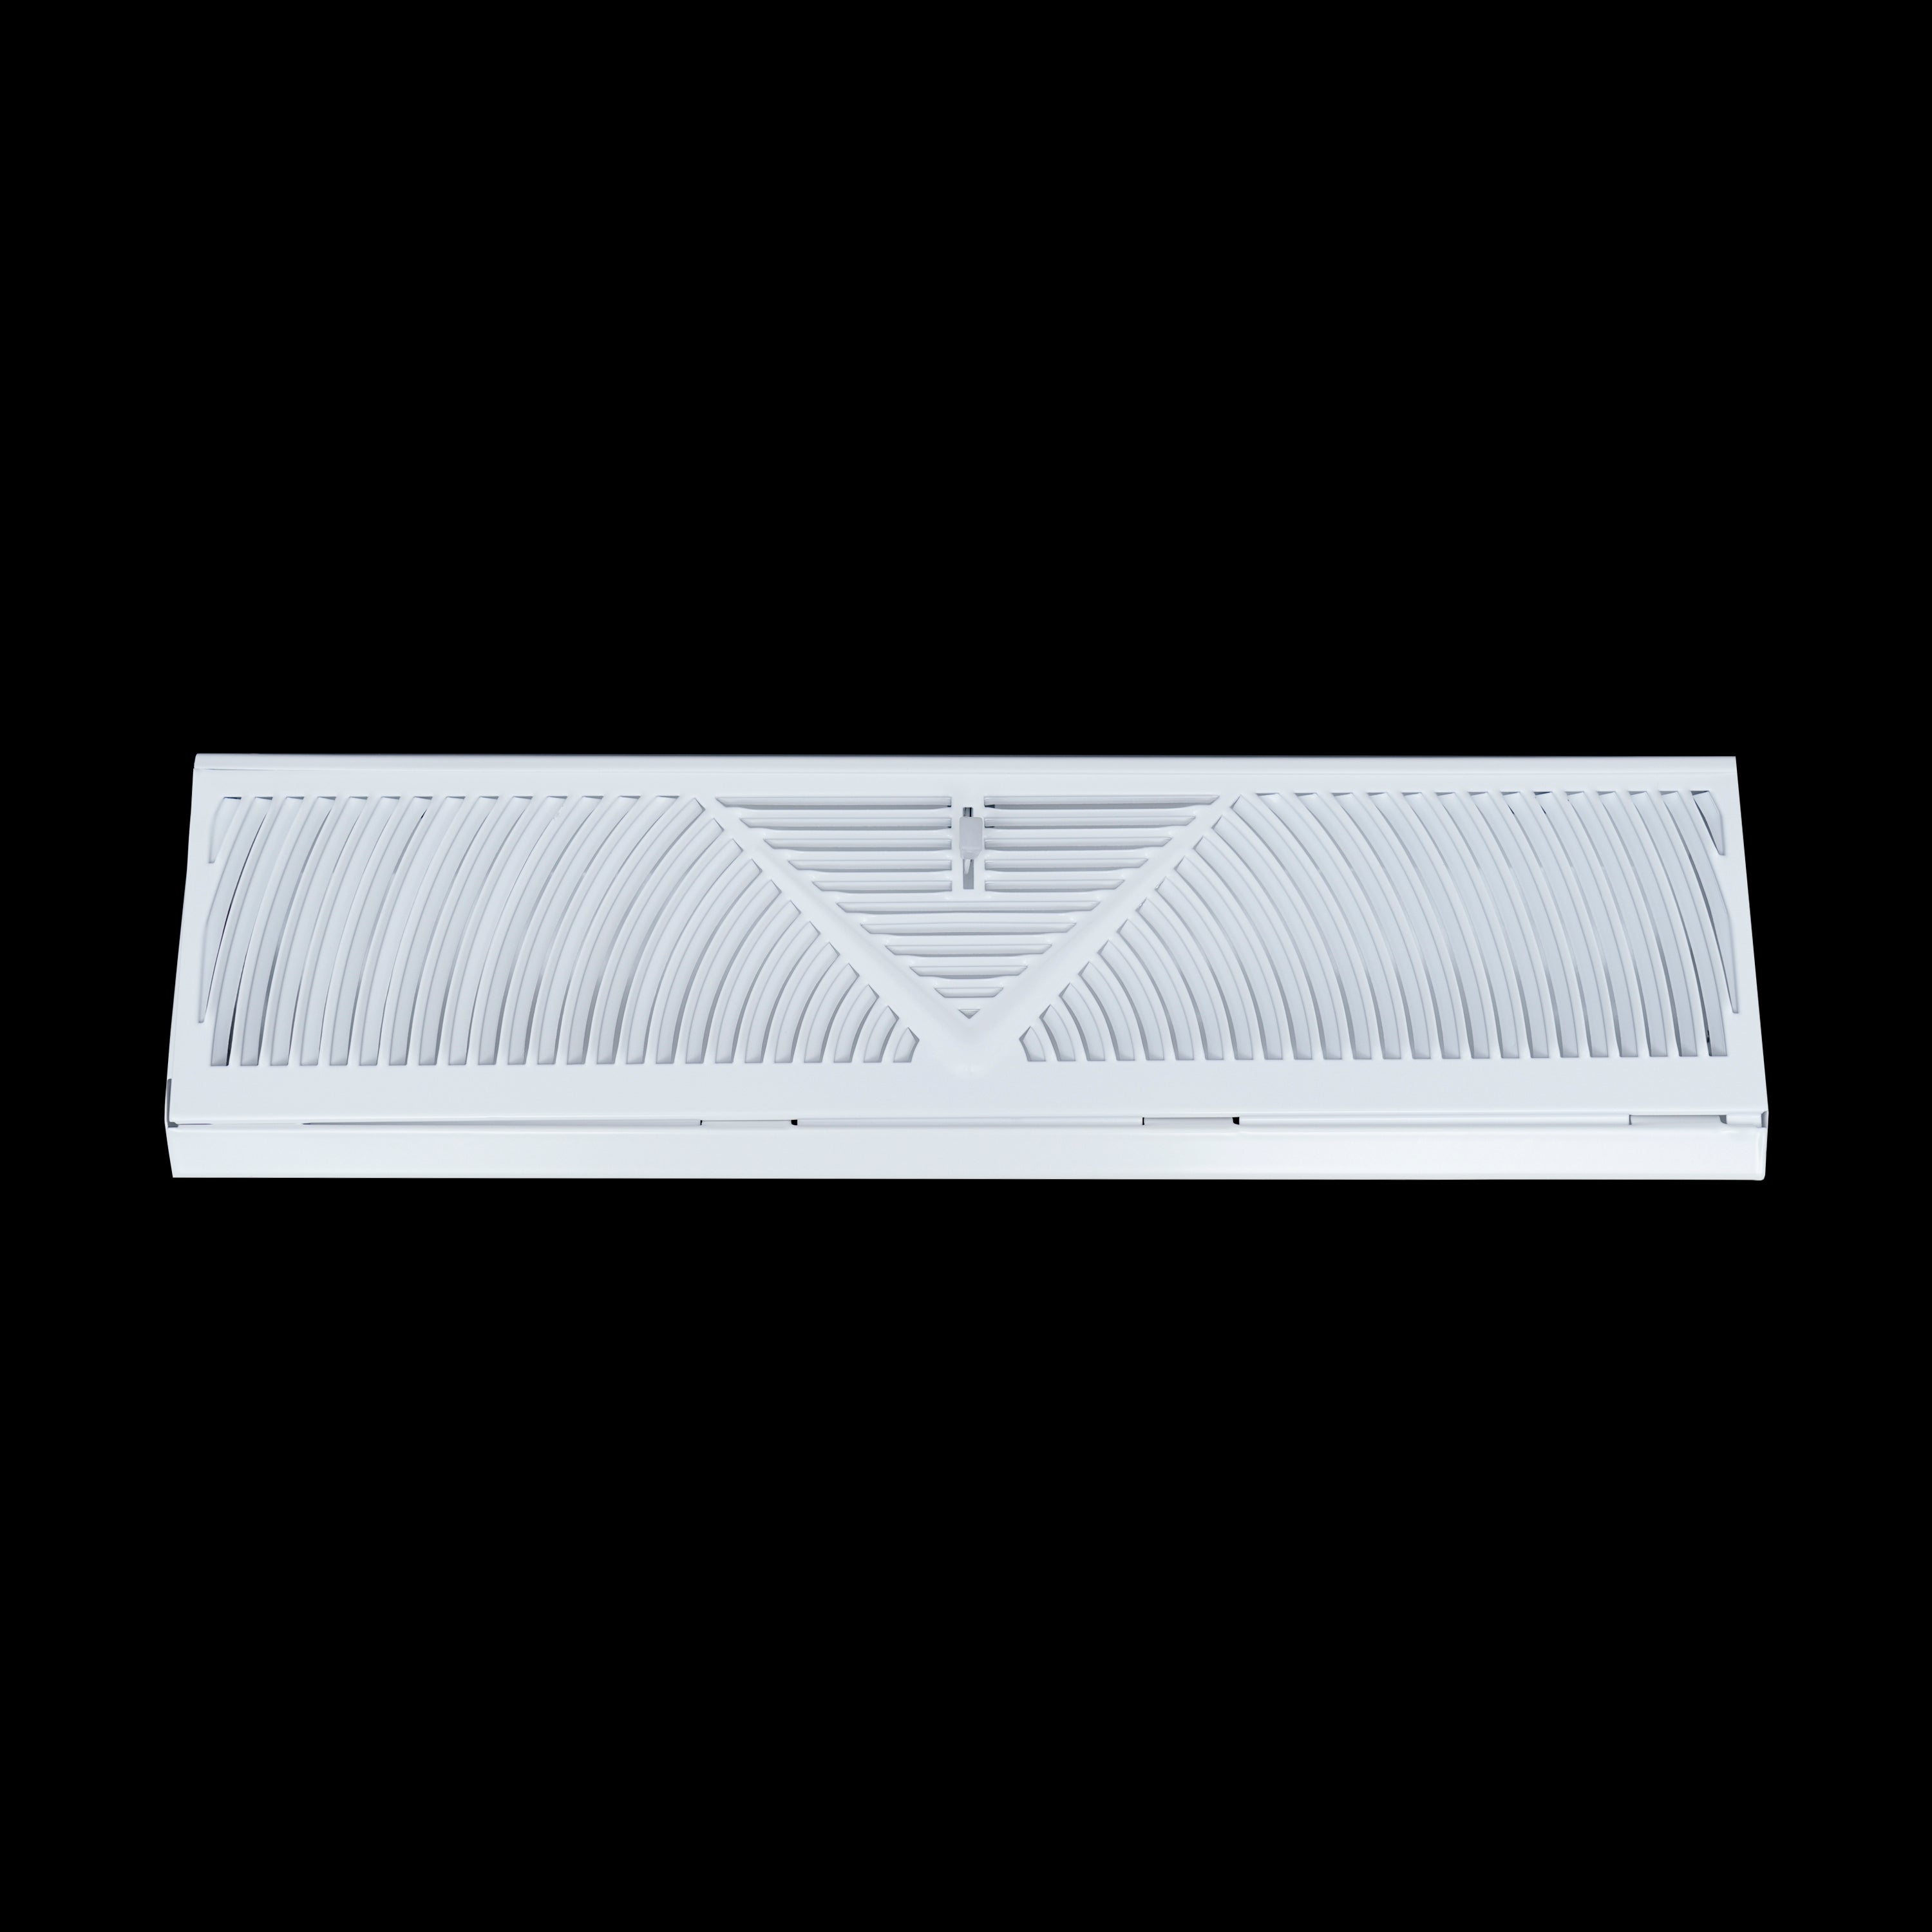 18" Corner Baseboard Return Air Grille | Round Type Air Flow Design | Register Vent Cover Grill | Adjustable Lever for Air Flow Control | White